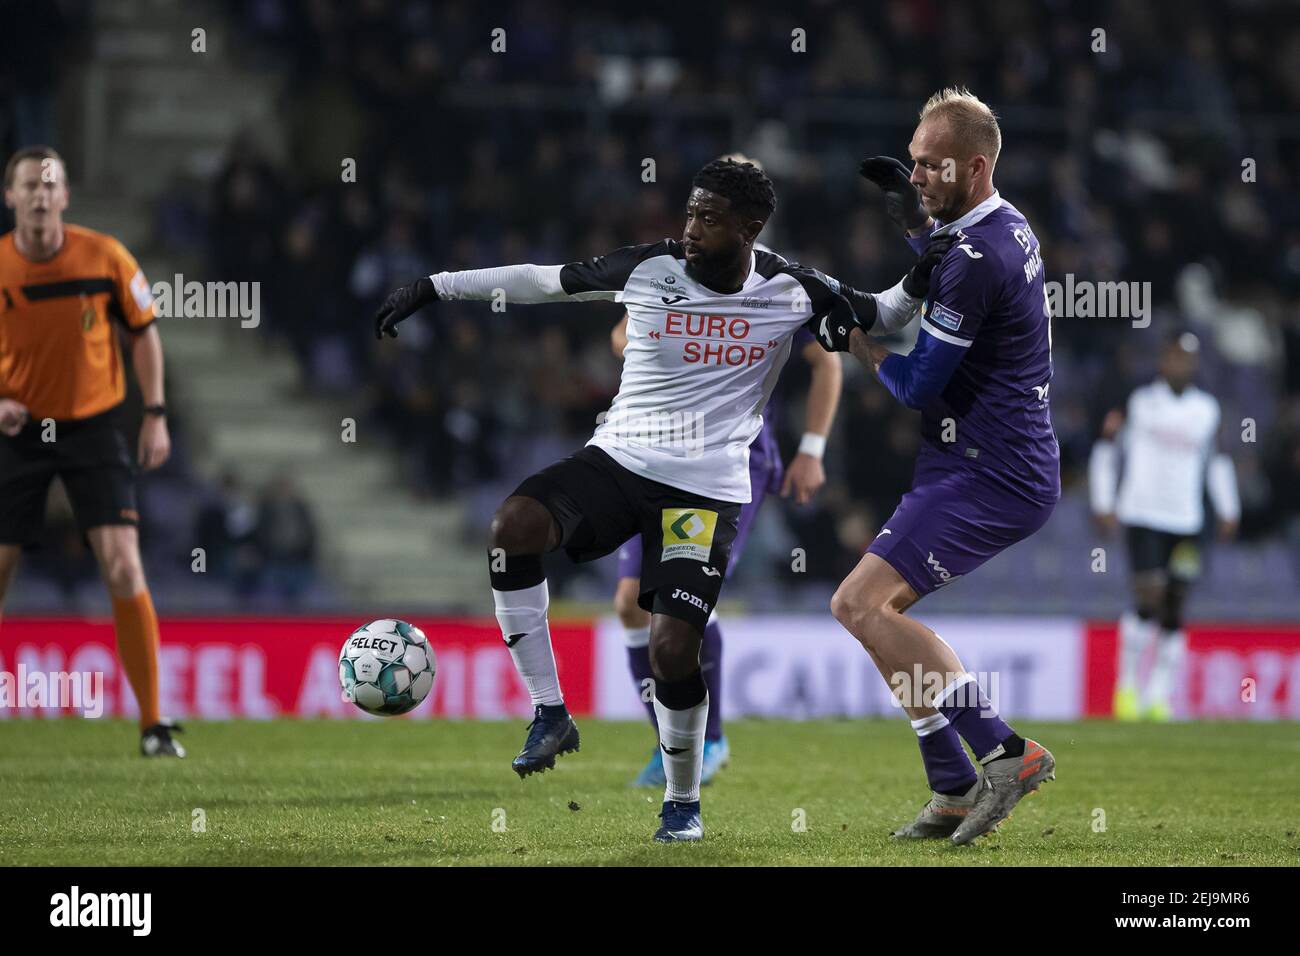 Roeselare's Arnold Mvuemba and Beerschot's Raphael Holzhauser pictured during a soccer game between Beerschot VA and KSV Roeselare, Friday 10 January 2020 in Antwerp, on day 21 of the 'Proximus League' 1B division of the Belgian soccer championship. BELGA PHOTO KRISTOF VAN ACCOM (Photo by KRISTOF VAN ACCOM/Belga/Sipa USA) Stock Photo